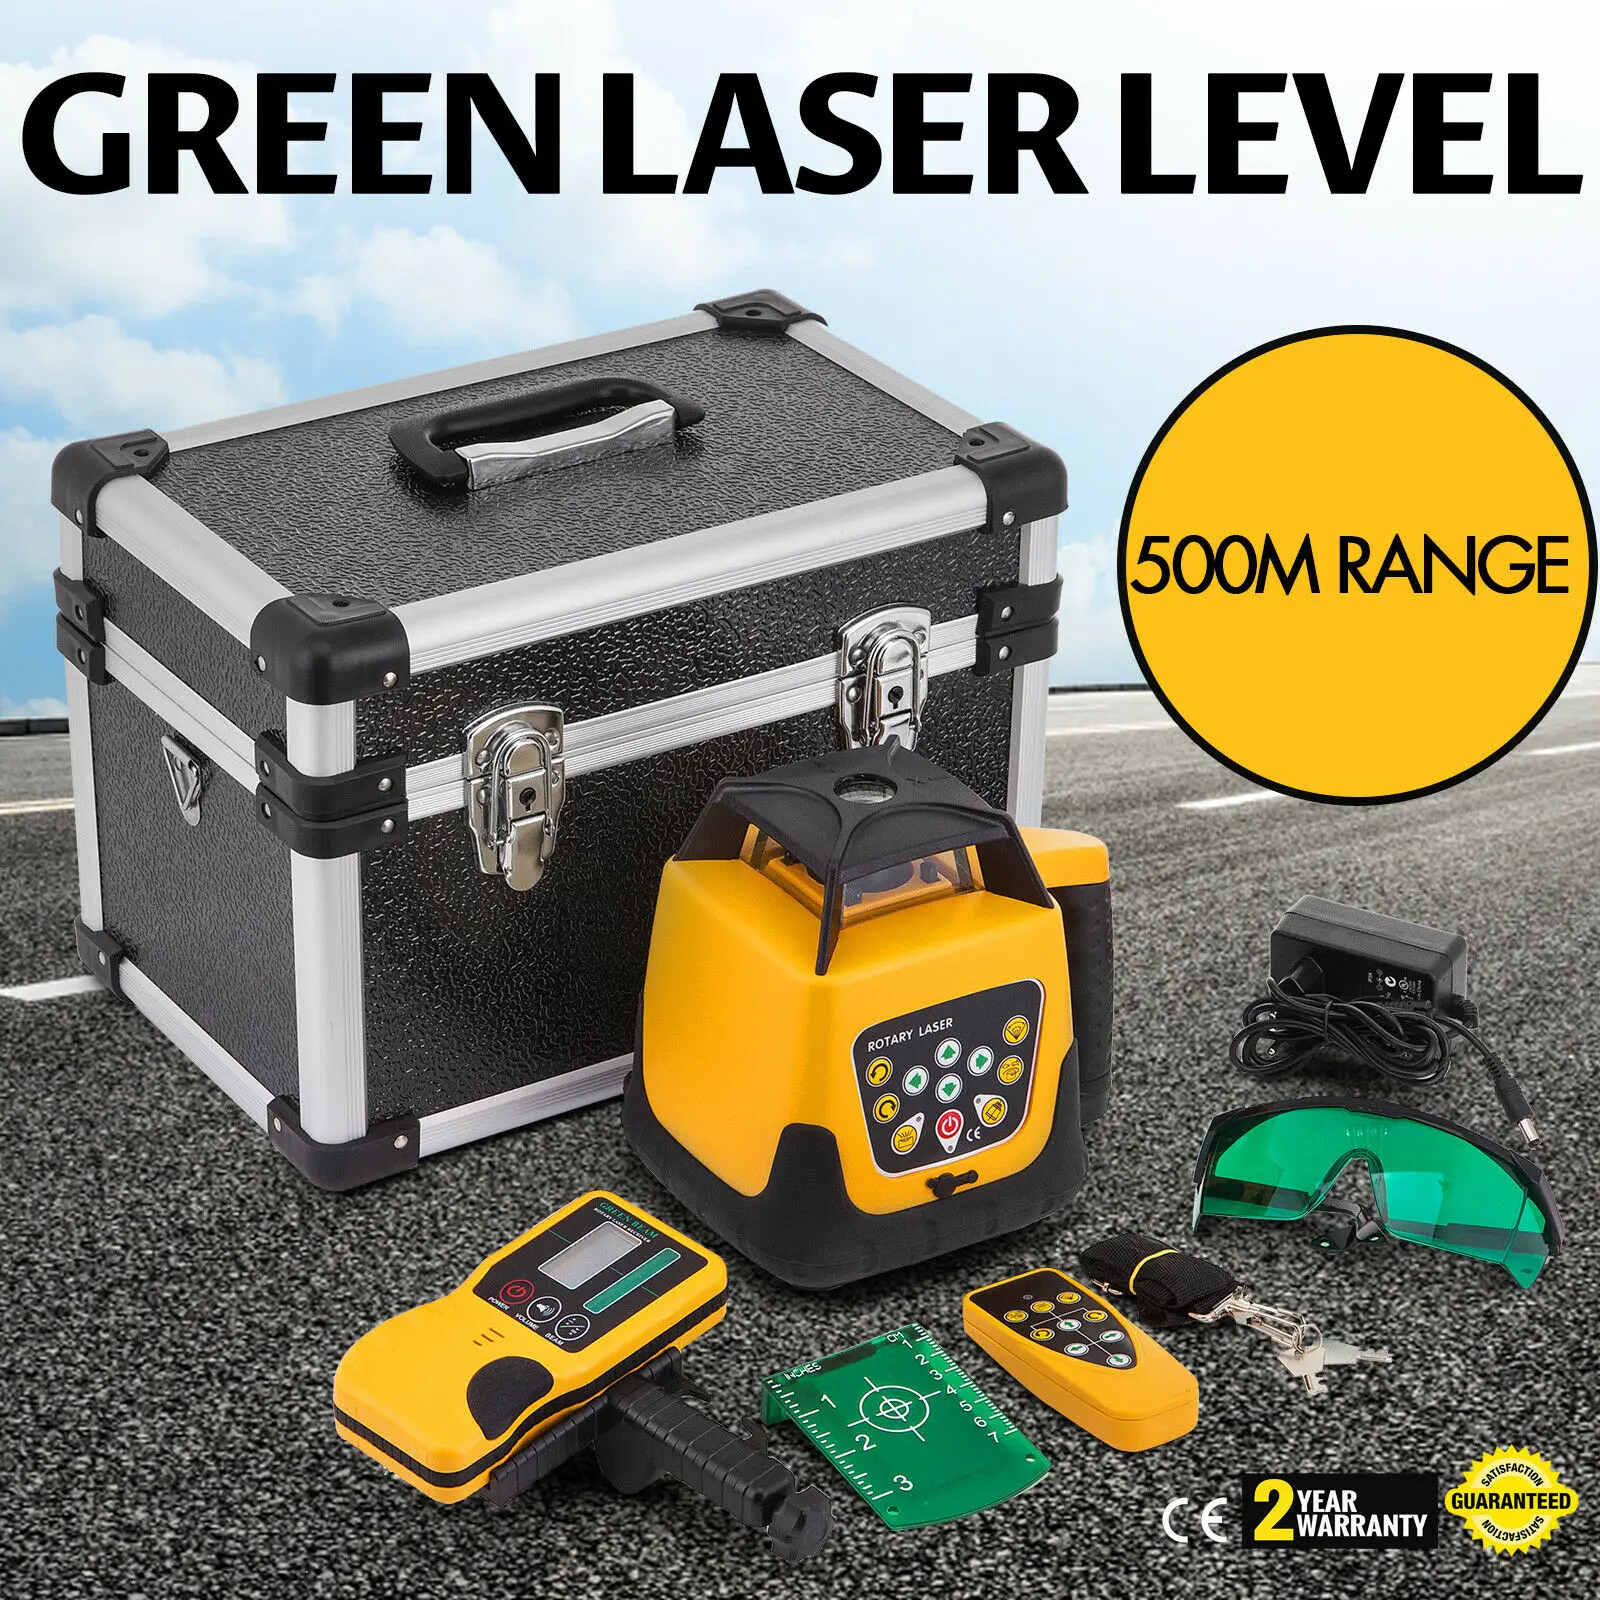 Details about   US Rotary Laser Level Green Beam Auto Self Leveling Measure Industrial Equipment 